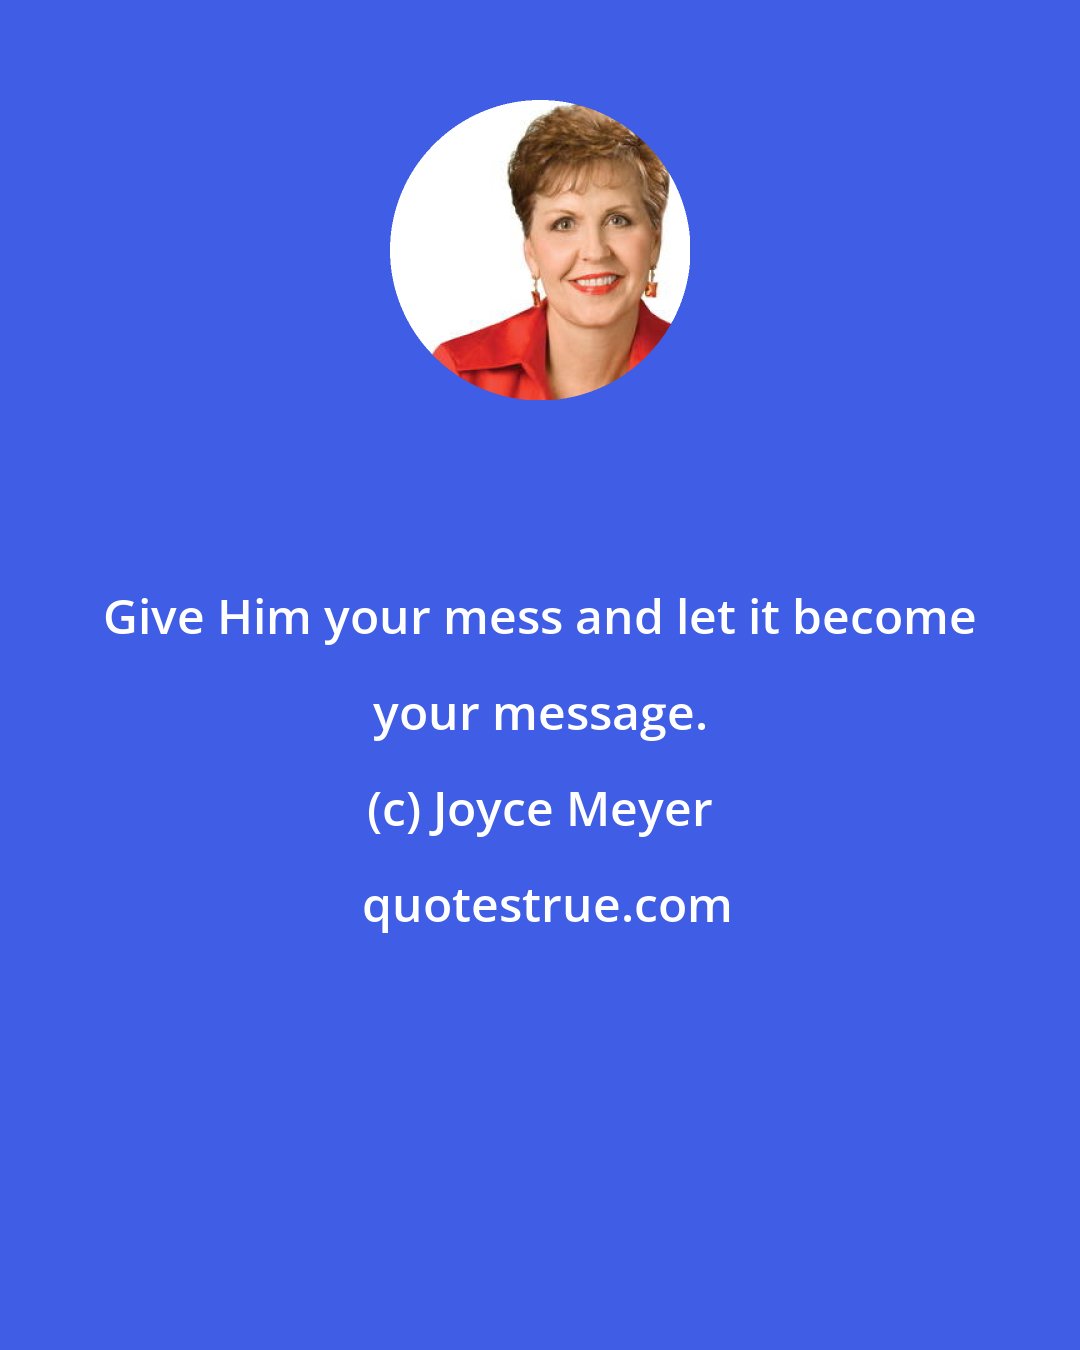 Joyce Meyer: Give Him your mess and let it become your message.